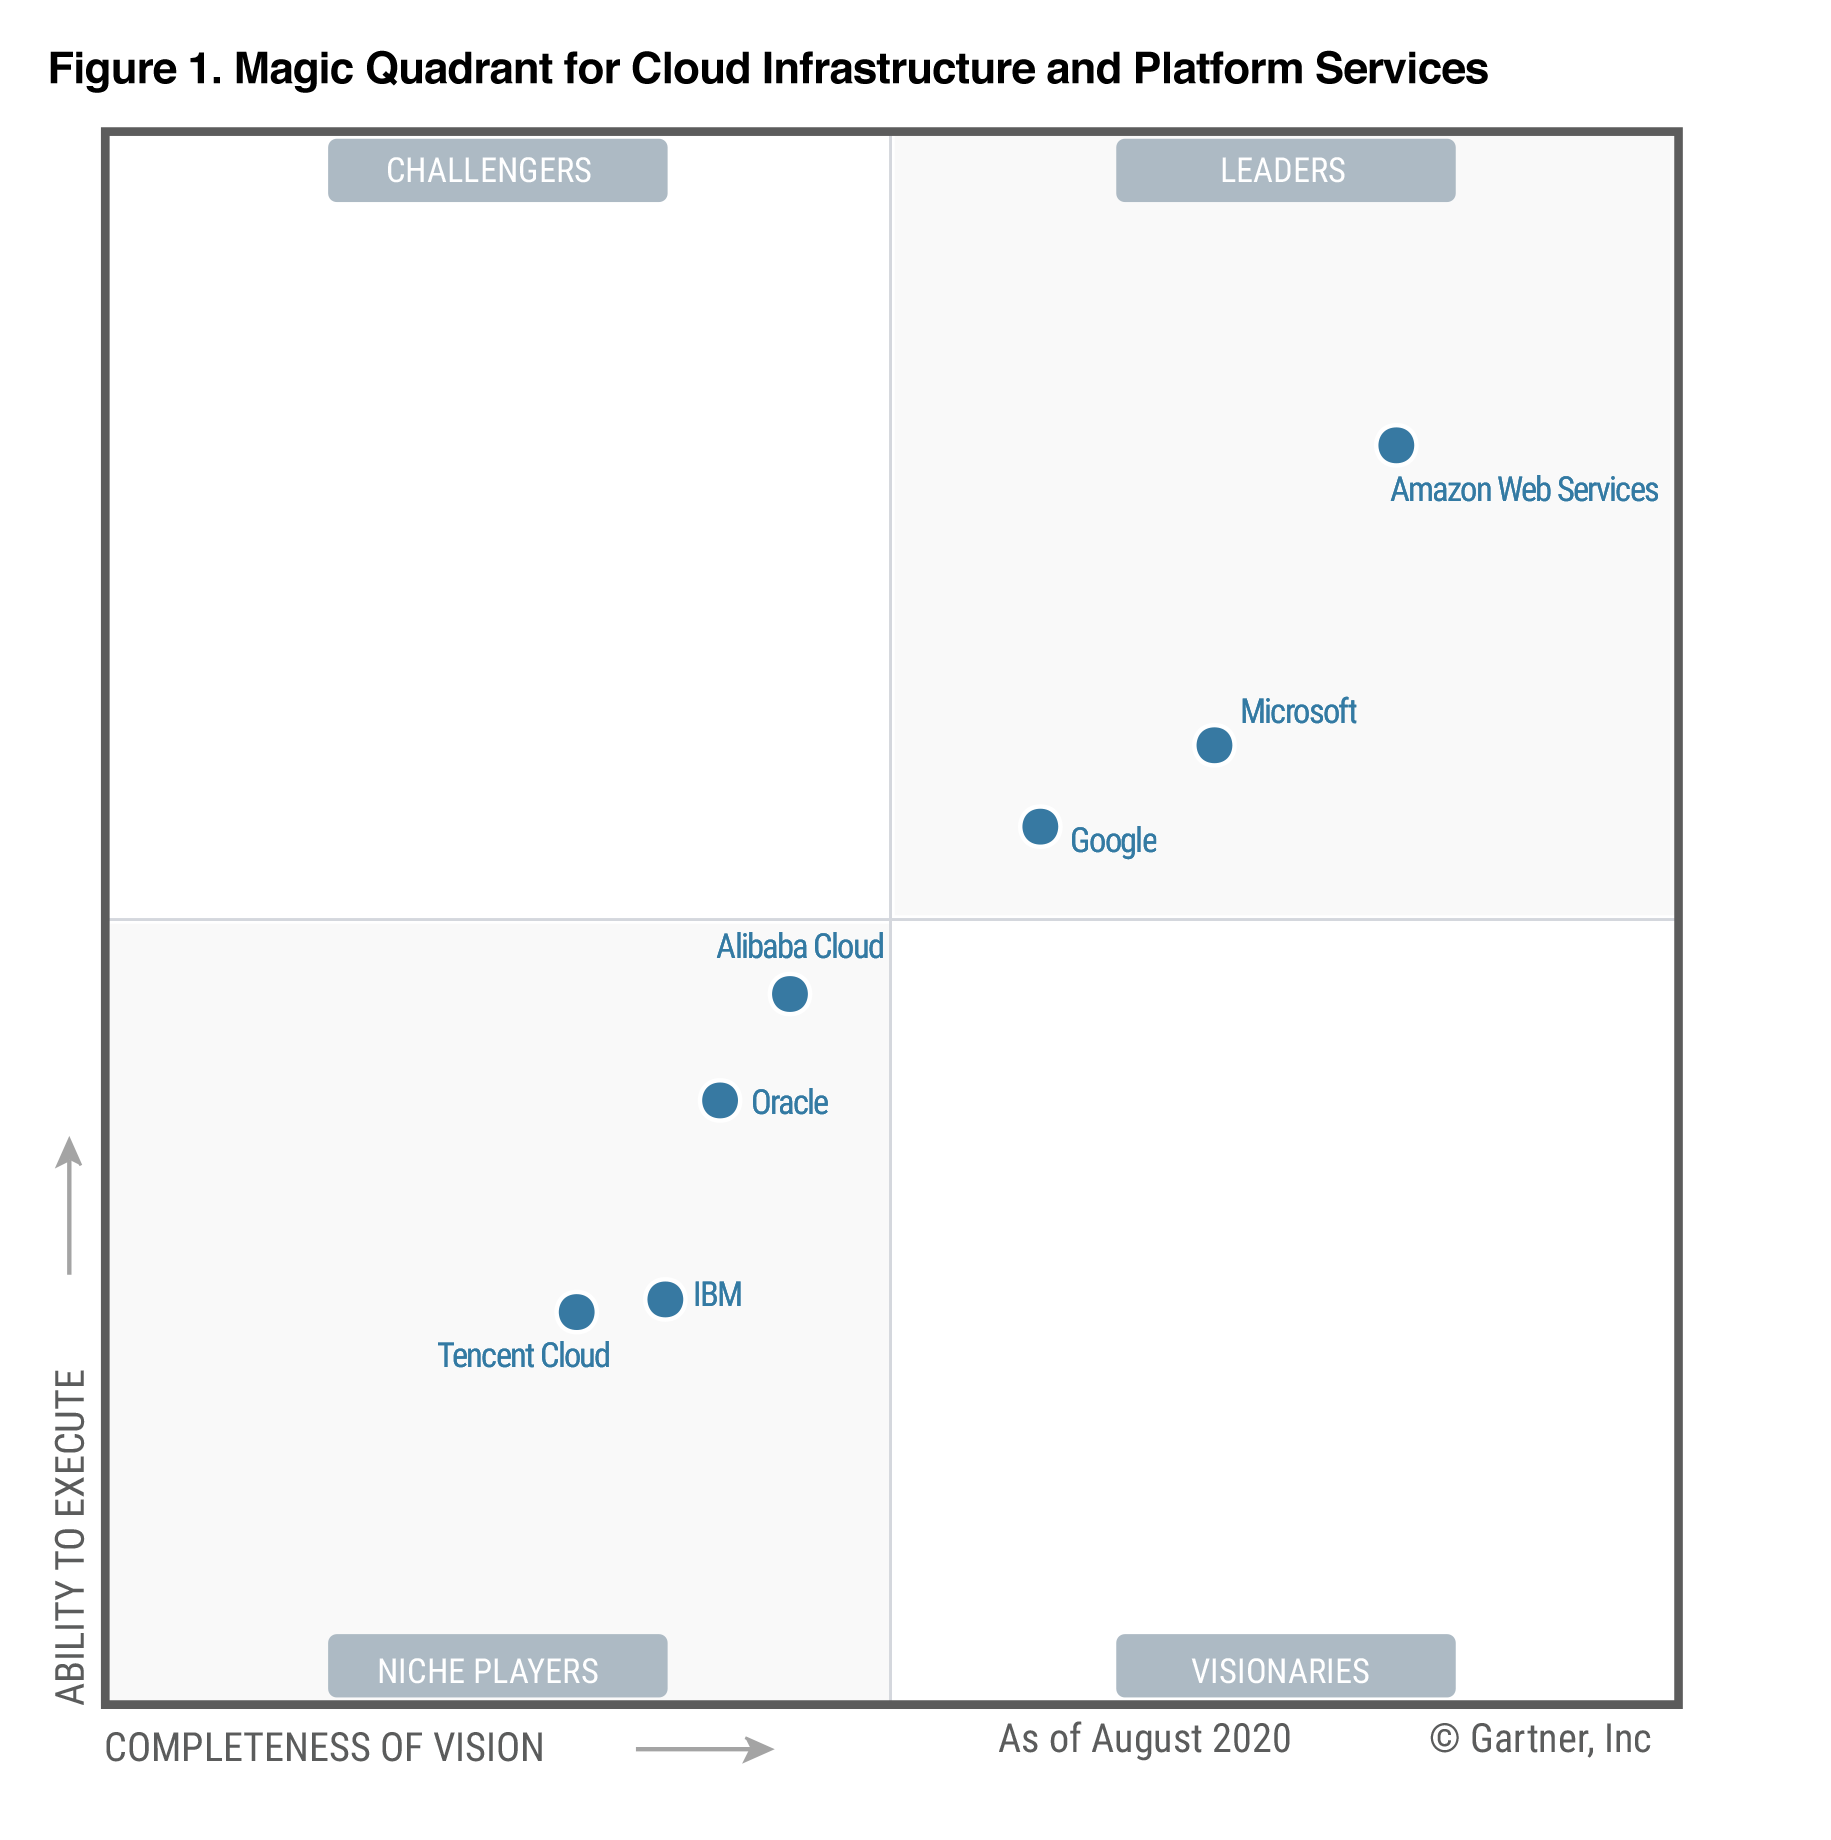 Magic Quadrant for Cloud Infrastructure and Platform Services